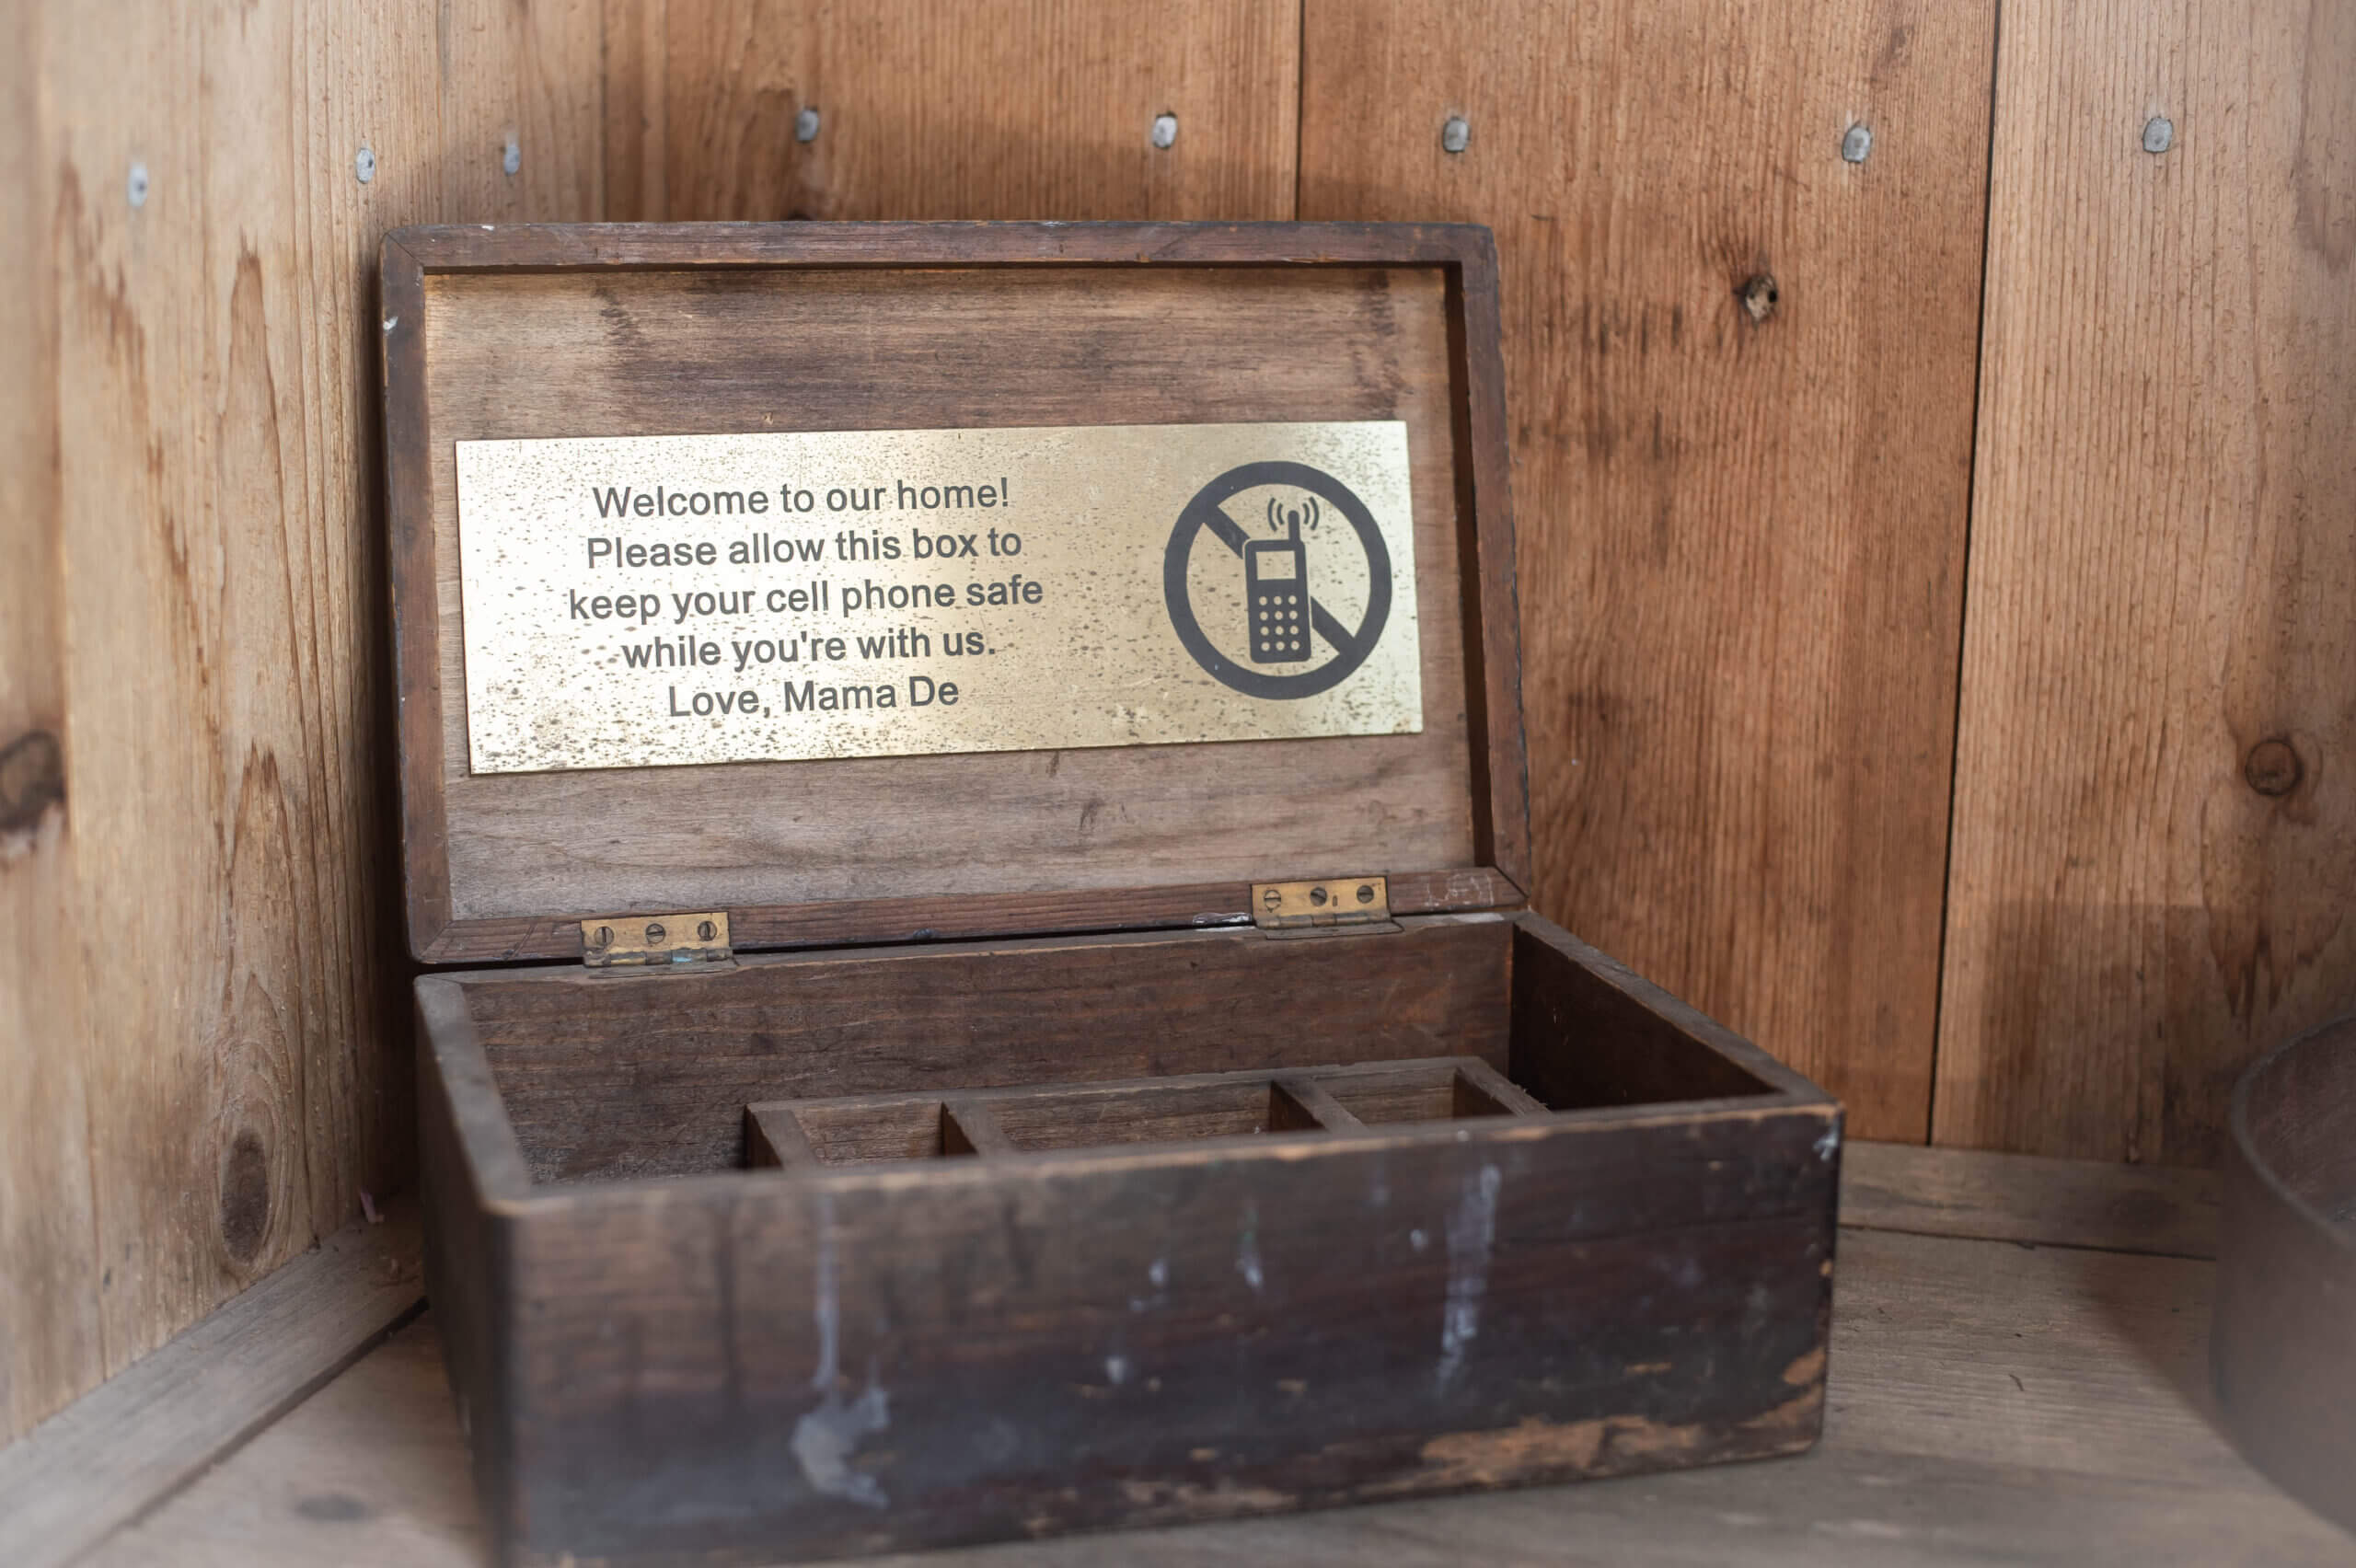 A color image of a wooden box opened up. There's a sign on the inside lid of the box that reads, "Welcome to our home! Please allow this box to keep your cell phone safe while you're with us. Love, Mama De." Next to the text there's a drawing of a cell phone inside of a circle with a cross going diagonally through it.